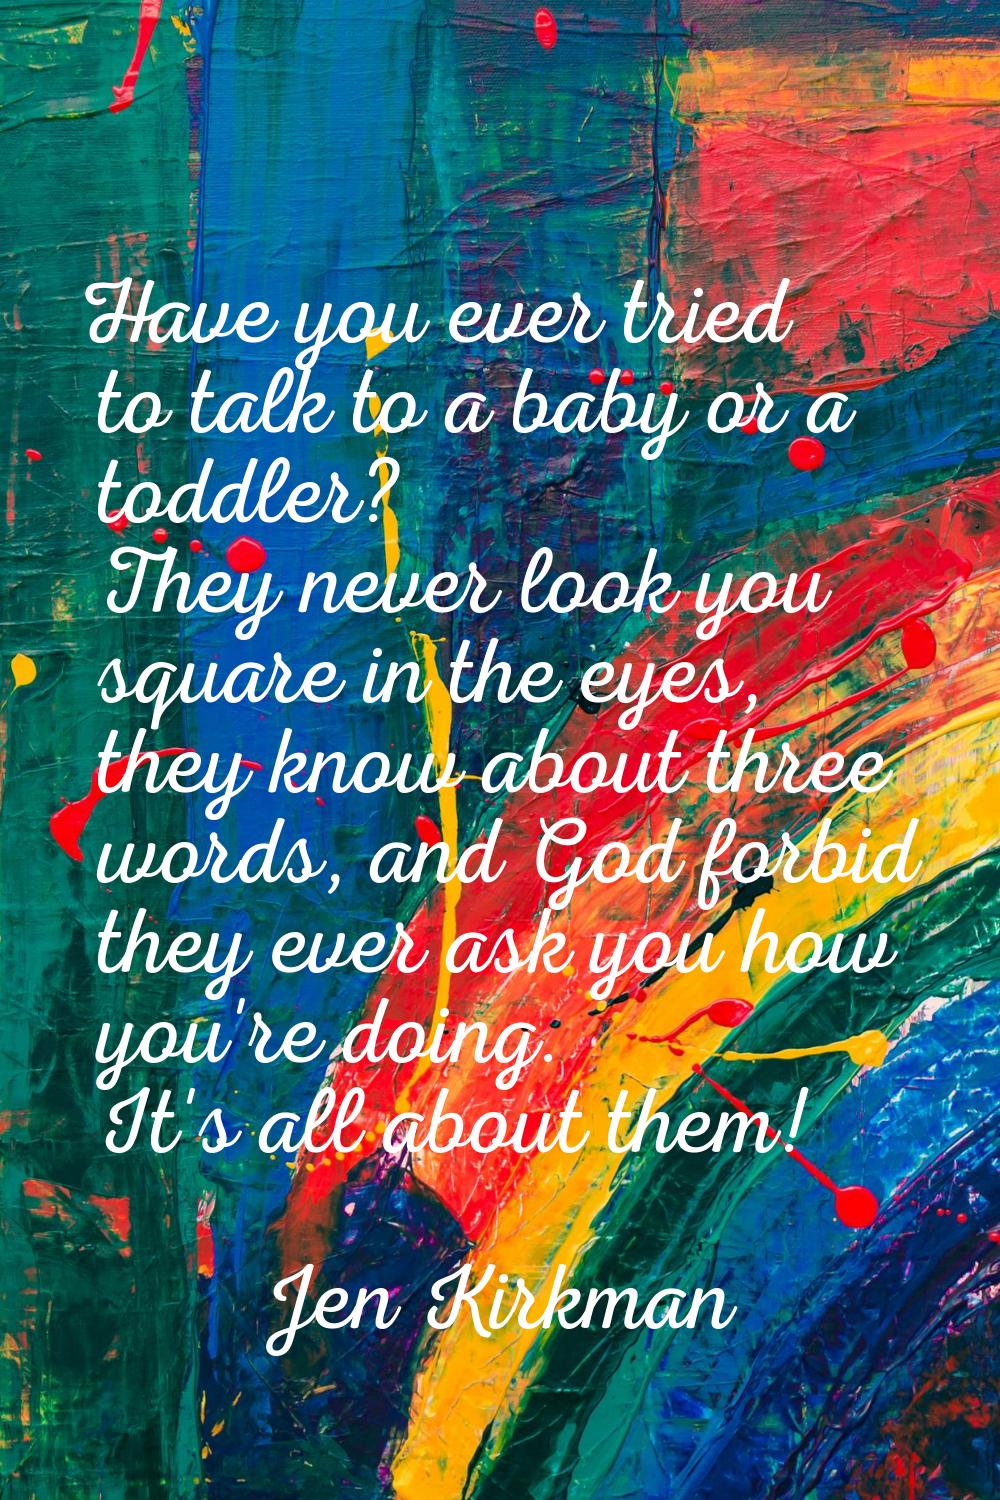 Have you ever tried to talk to a baby or a toddler? They never look you square in the eyes, they kn